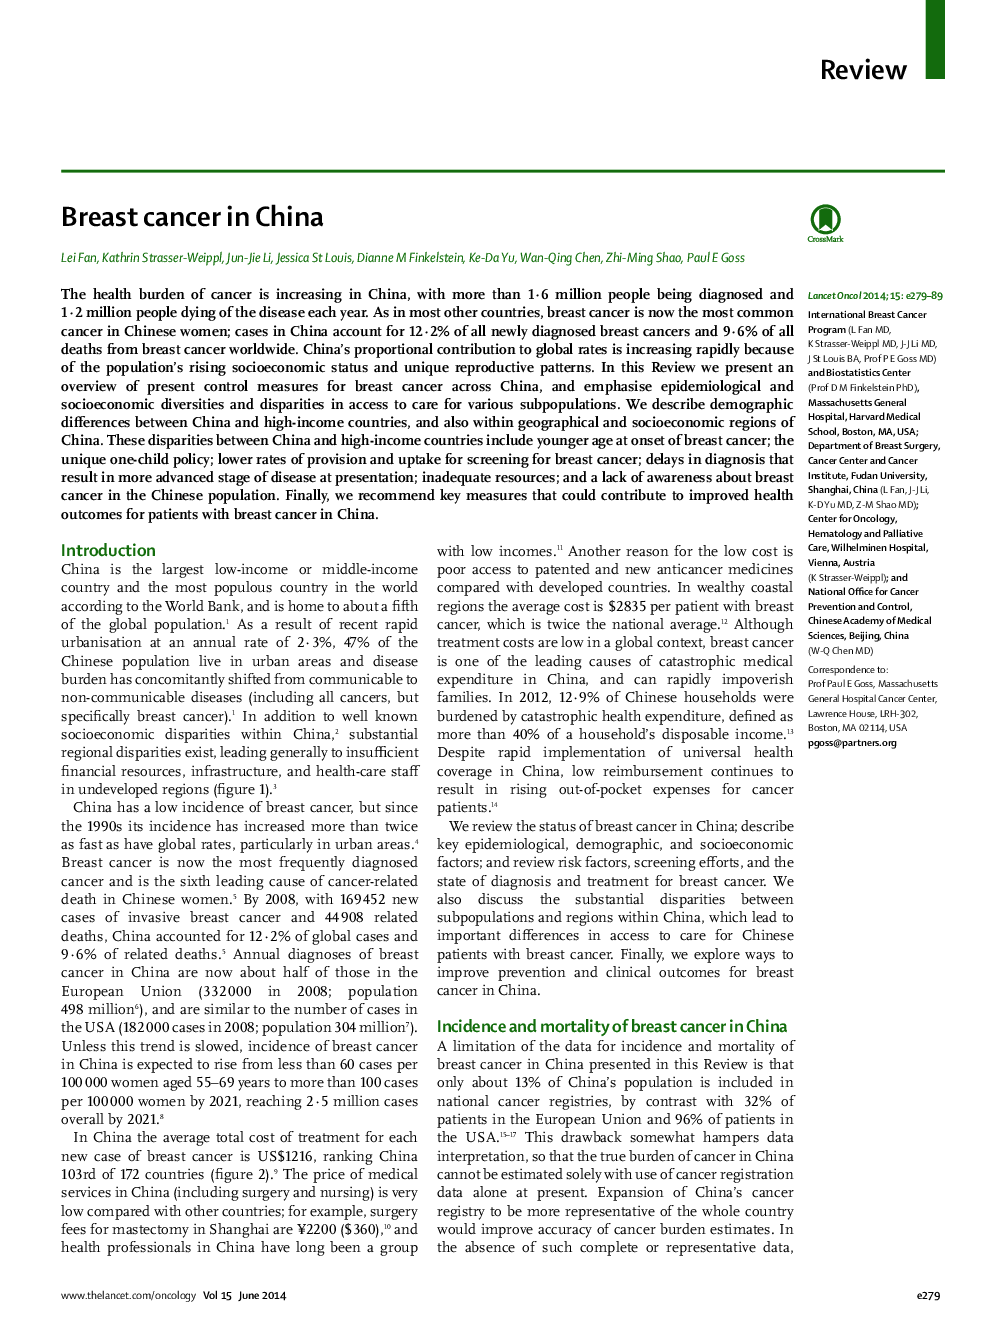 Breast cancer in China